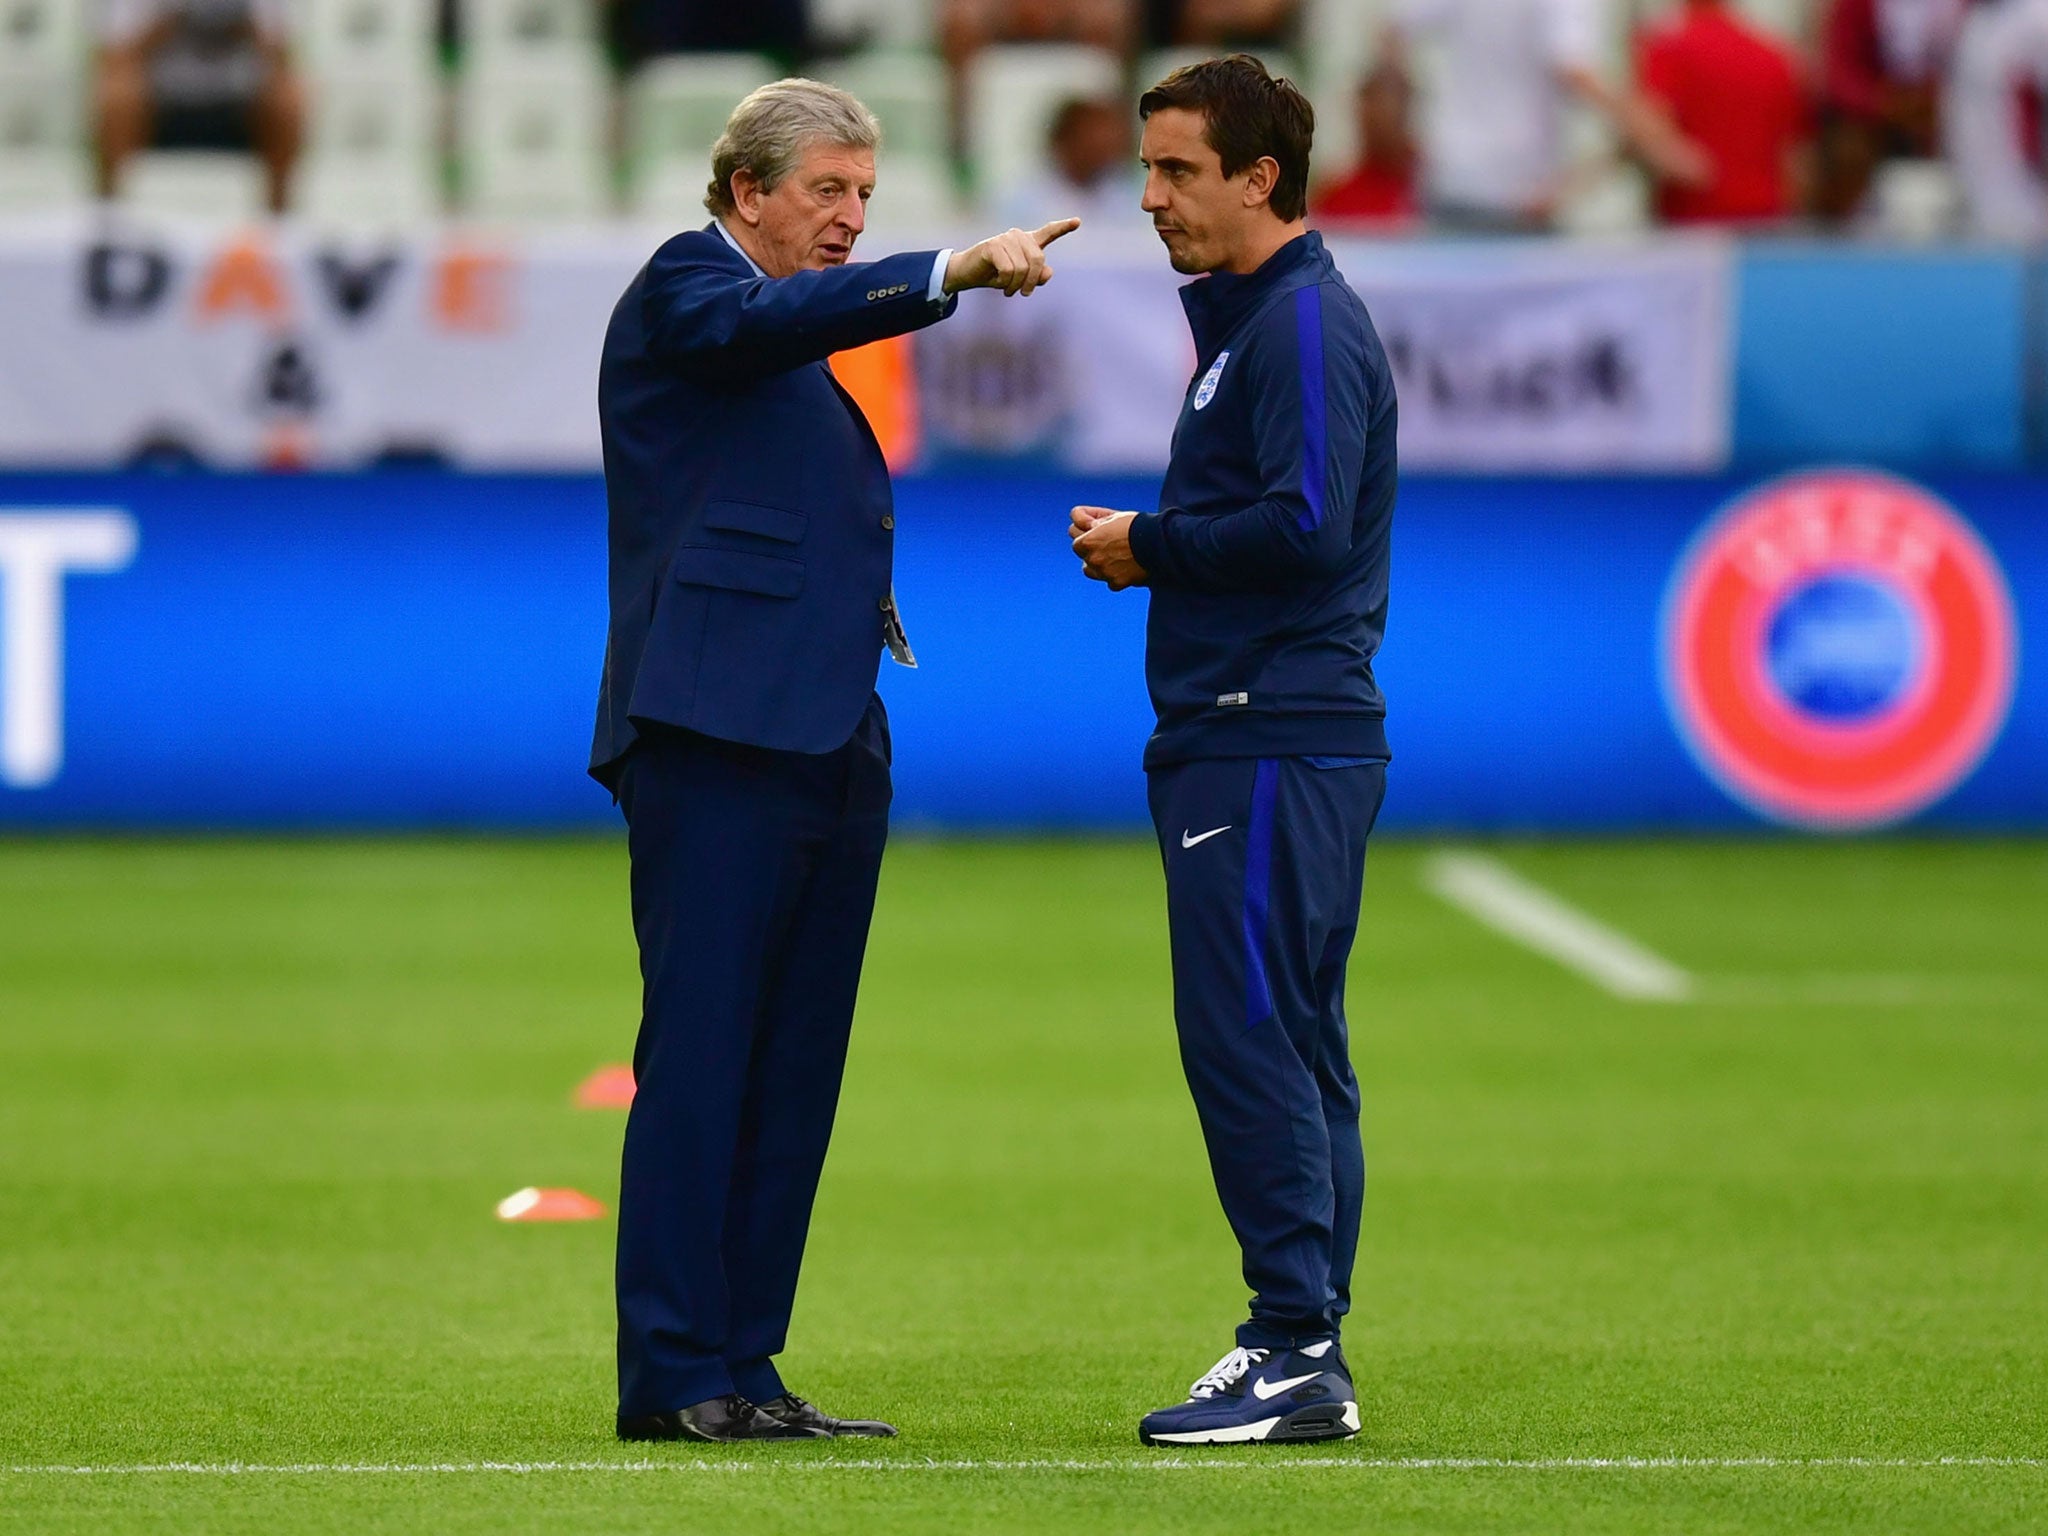 Neville has denied the claims of a rift between himself and Hodgson